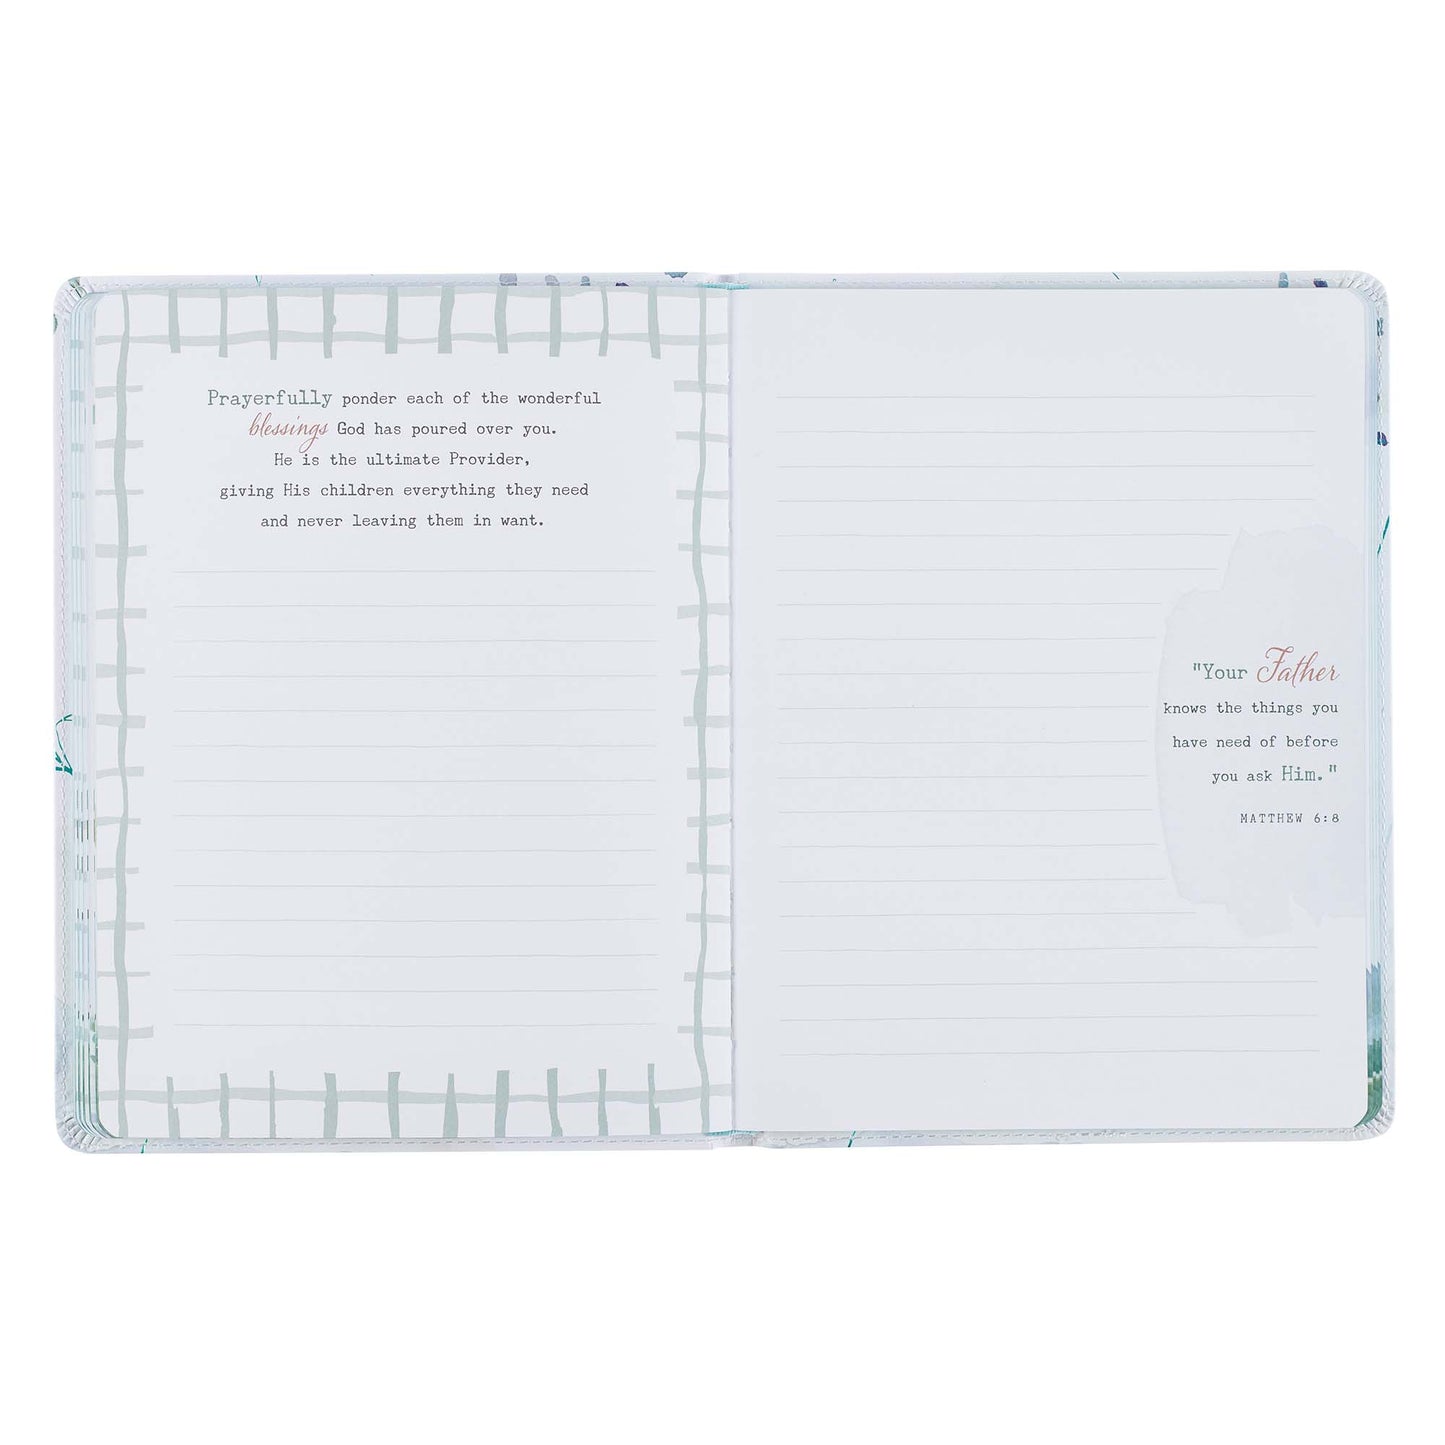 Be Still Faux Leather Prayer Journal for Women - The Christian Gift Company